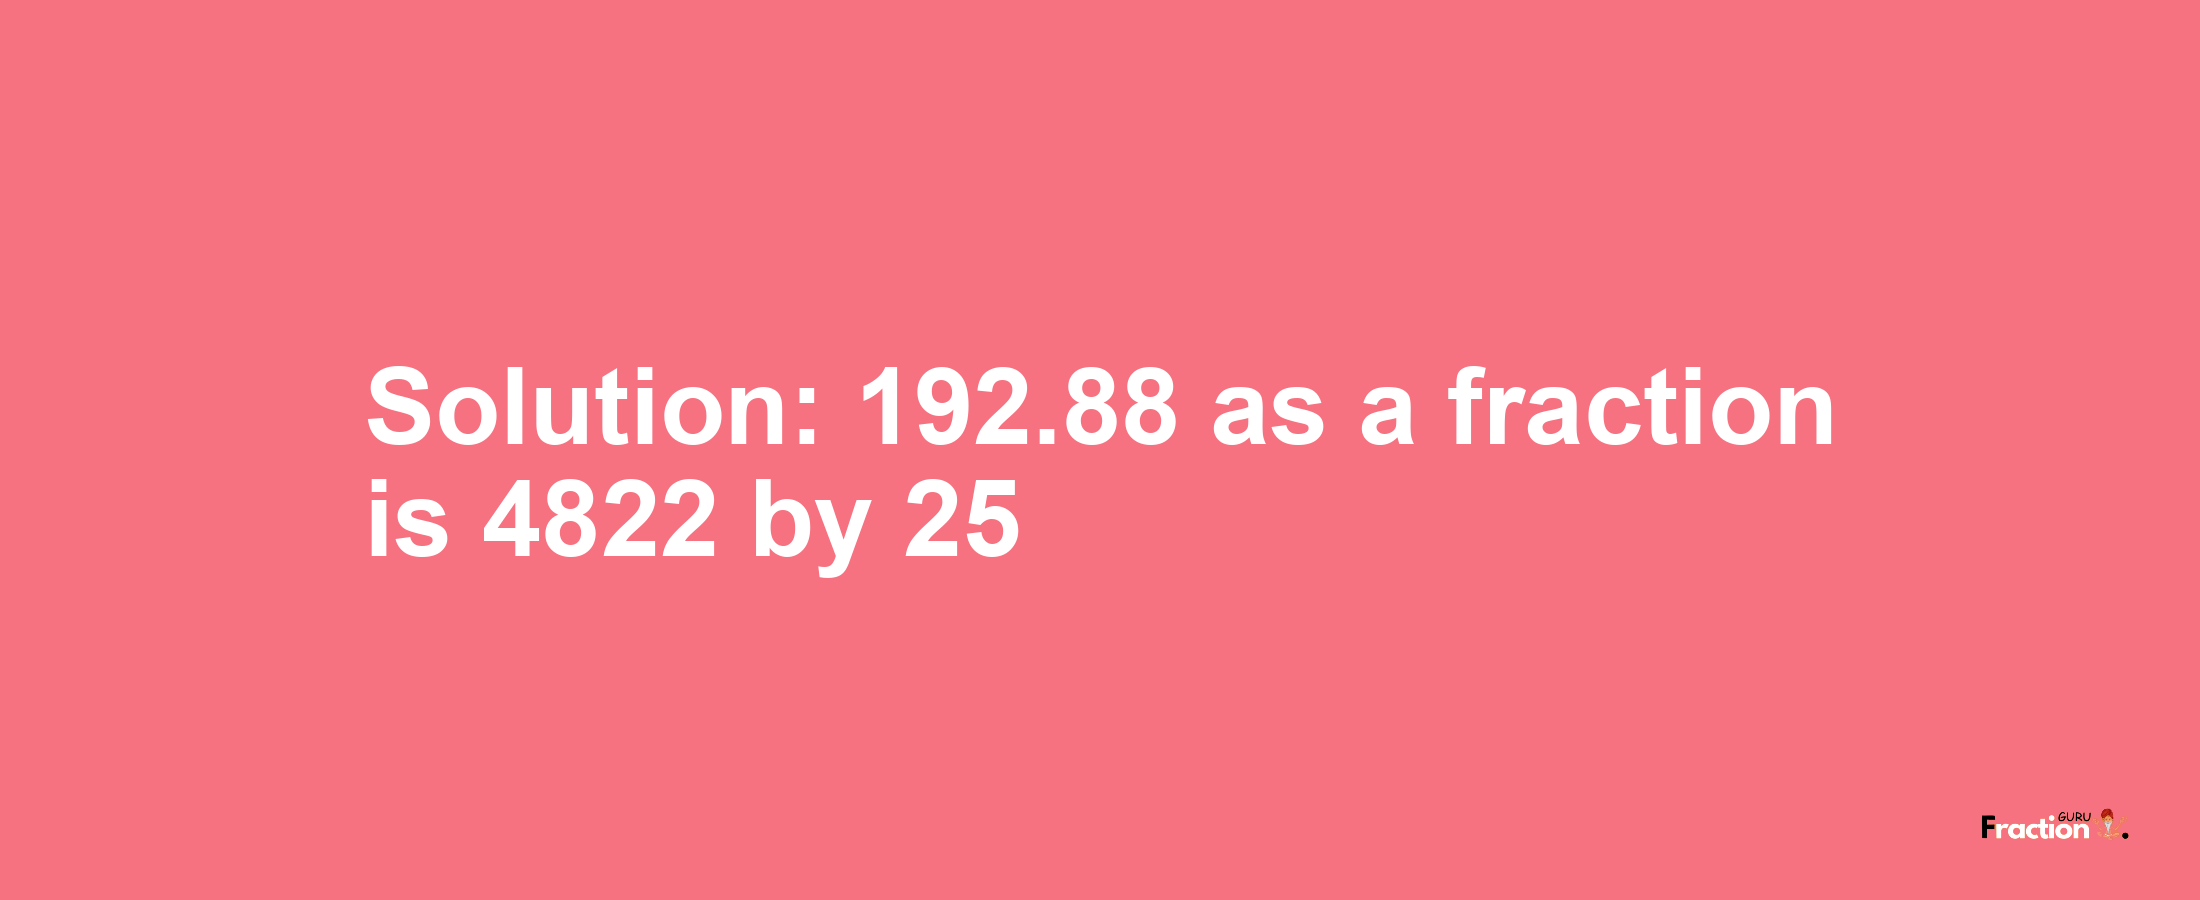 Solution:192.88 as a fraction is 4822/25